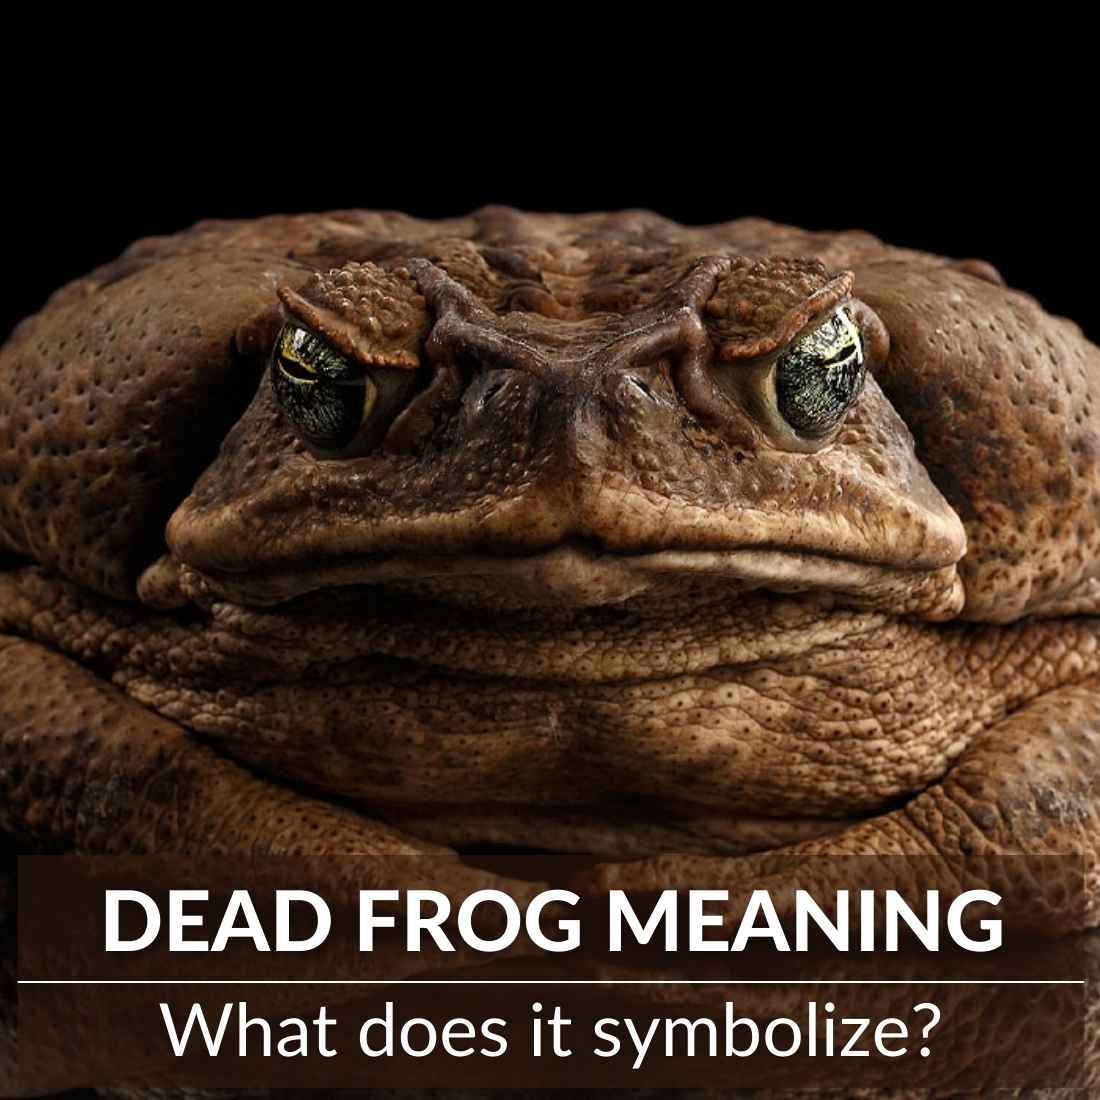 Dead frog meaning